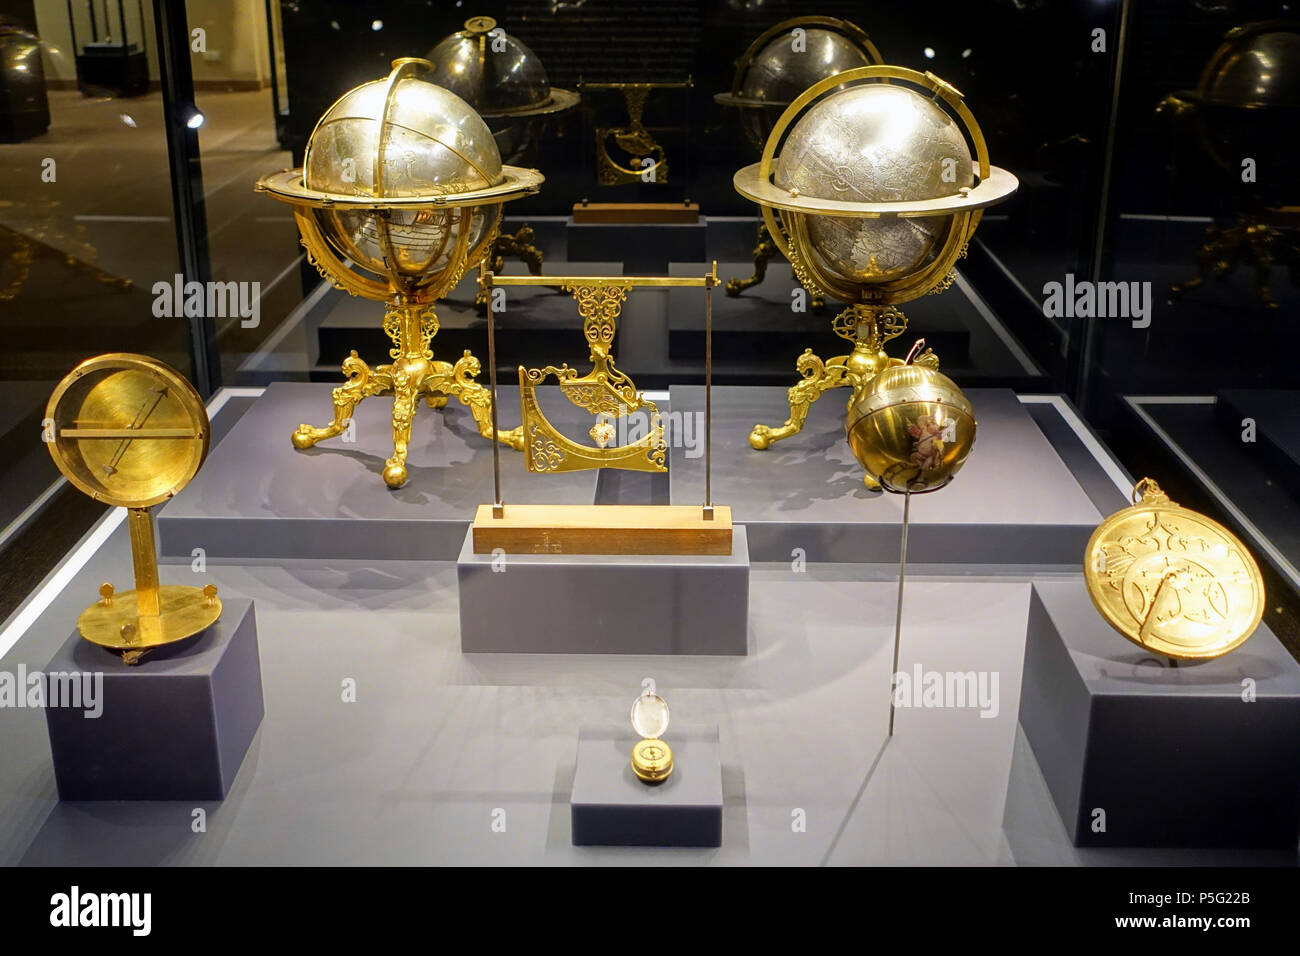 N/A. English: Exhibit in the Hessisches Landesmuseum Darmstadt - Darmstadt, Germany. 19 October 2016, 06:16:59. Daderot 143 Astronomical globes and instruments - Hessisches Landesmuseum Darmstadt - Darmstadt, Germany -DSC00532 Stock Photo